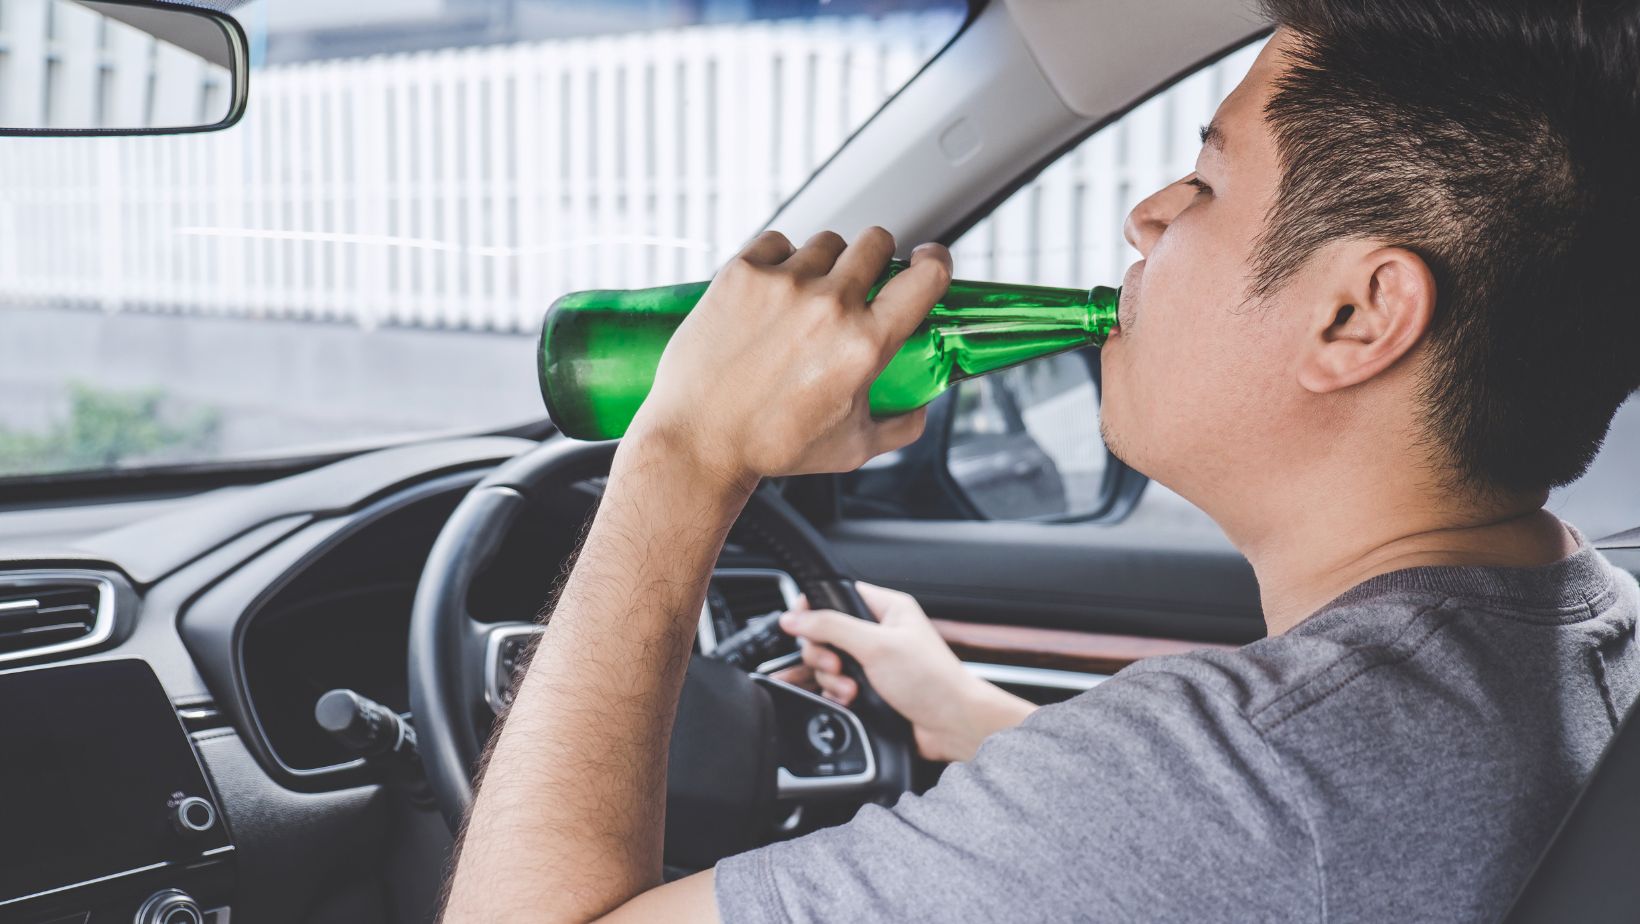 if you drink alcohol socially, what helps ensure safe driving?